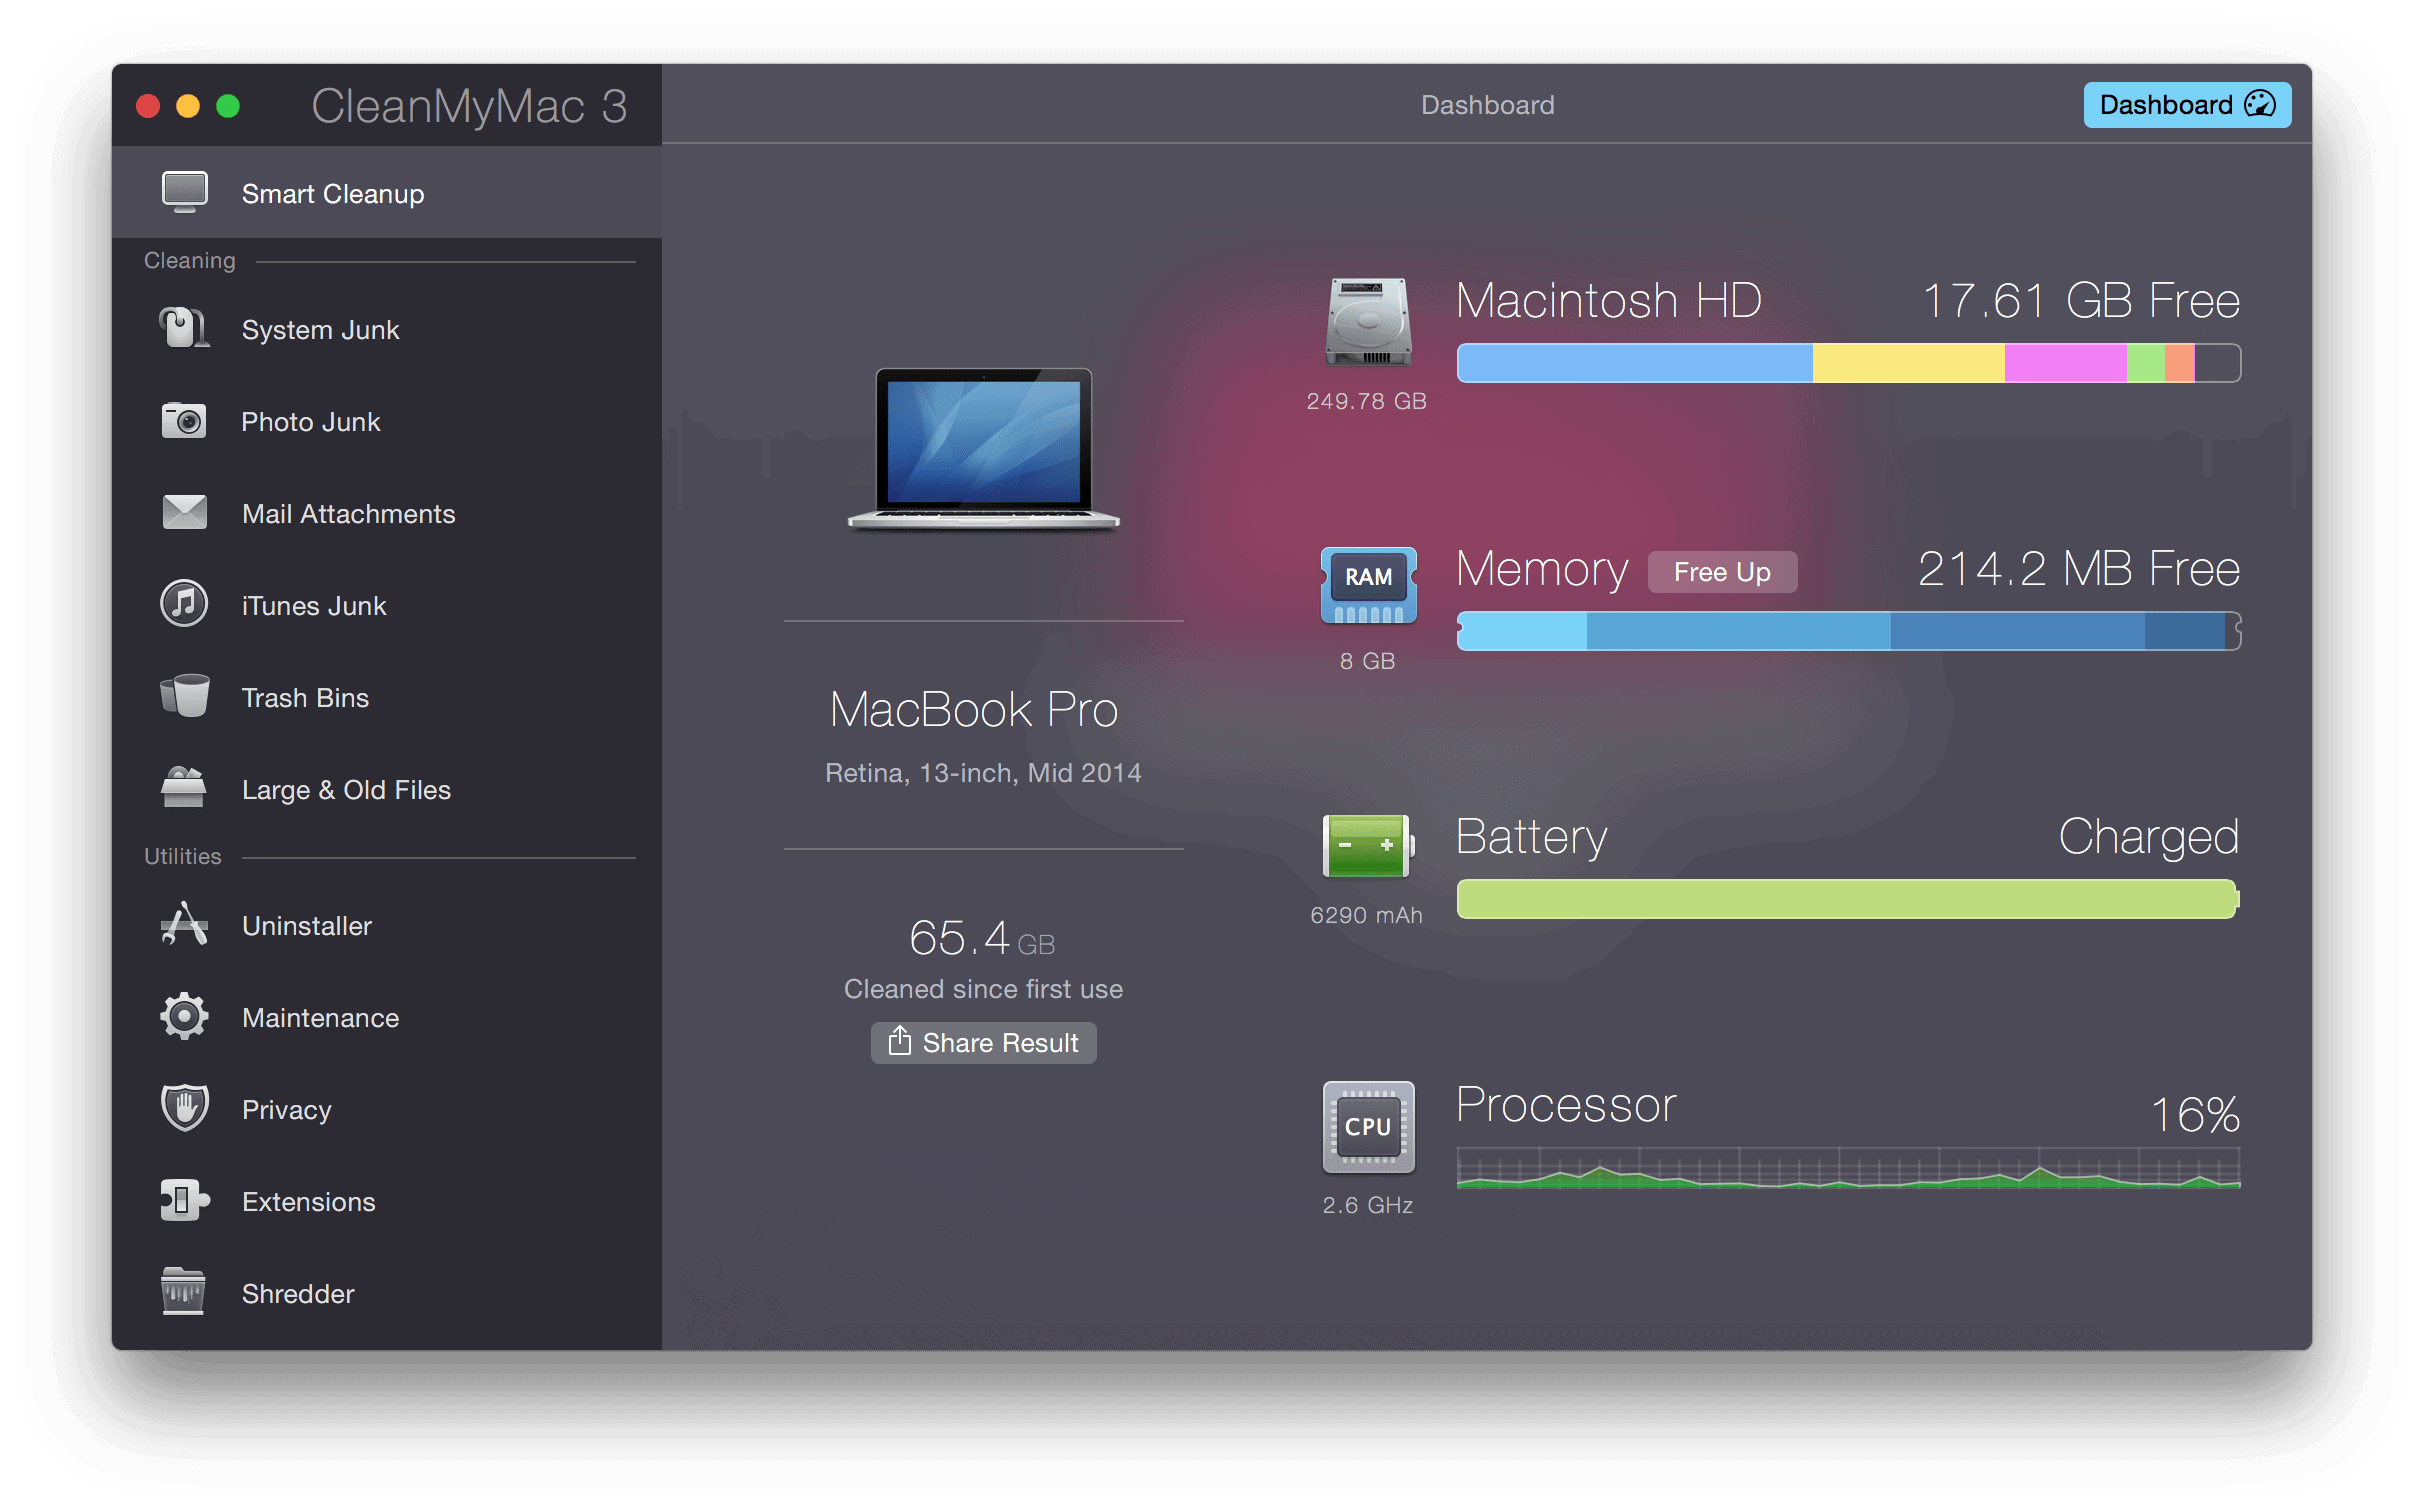 cleanmymac app review